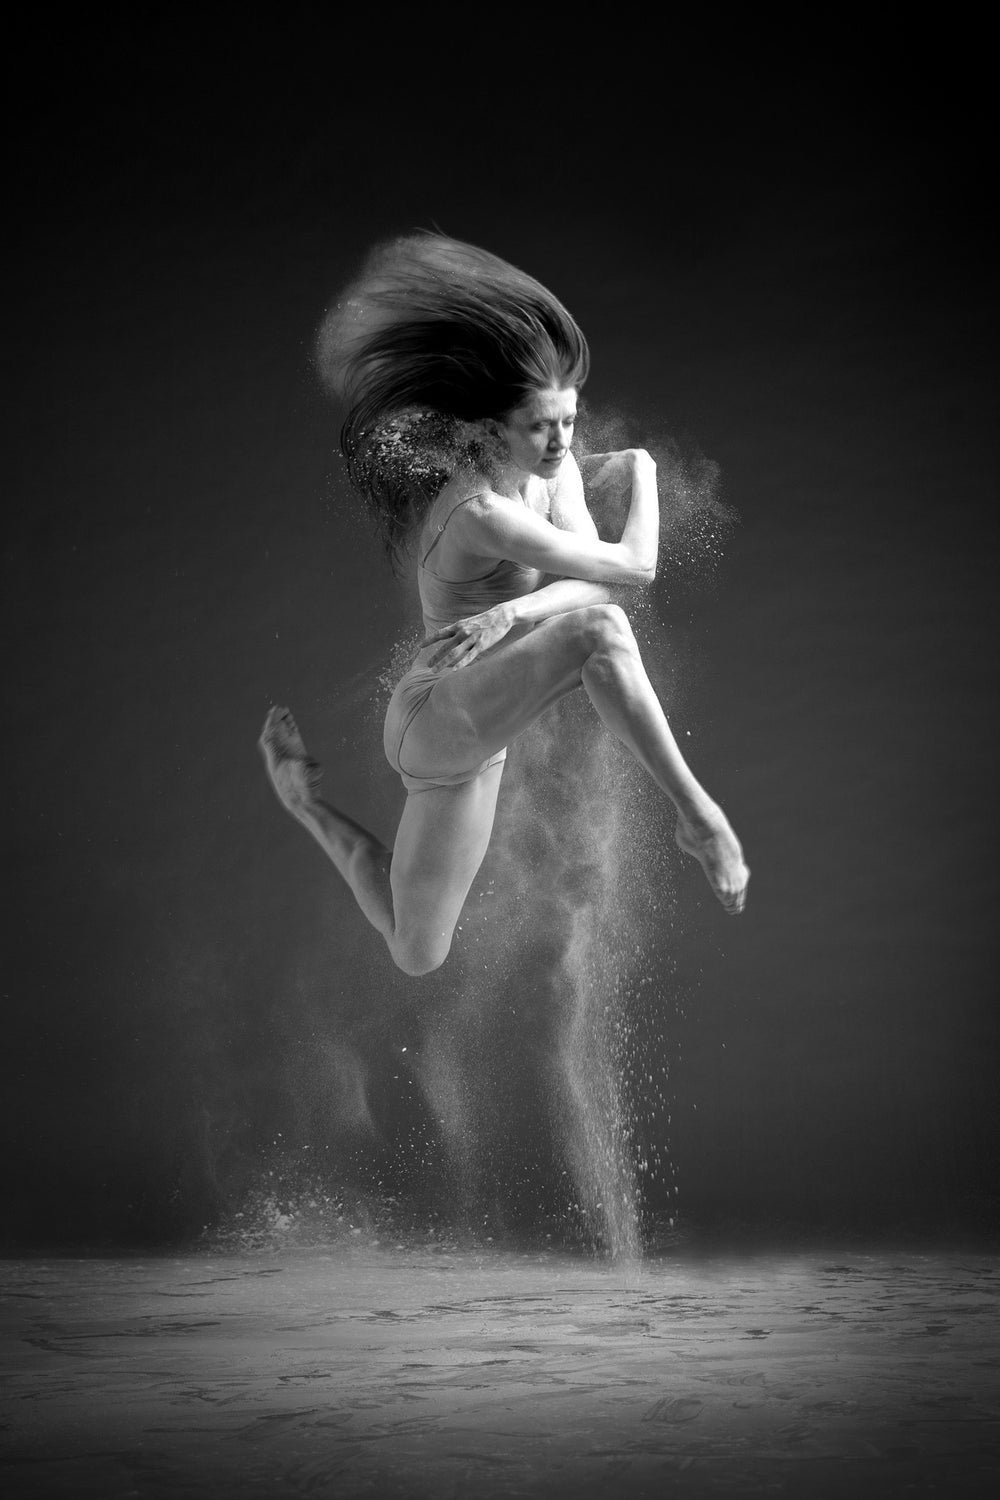 Art Dance Photography Prints - Purchase Online the artwork: Dancer solo in the air jumping and spreading dust from her long hair in a photo in black and white by Francsico Estevez